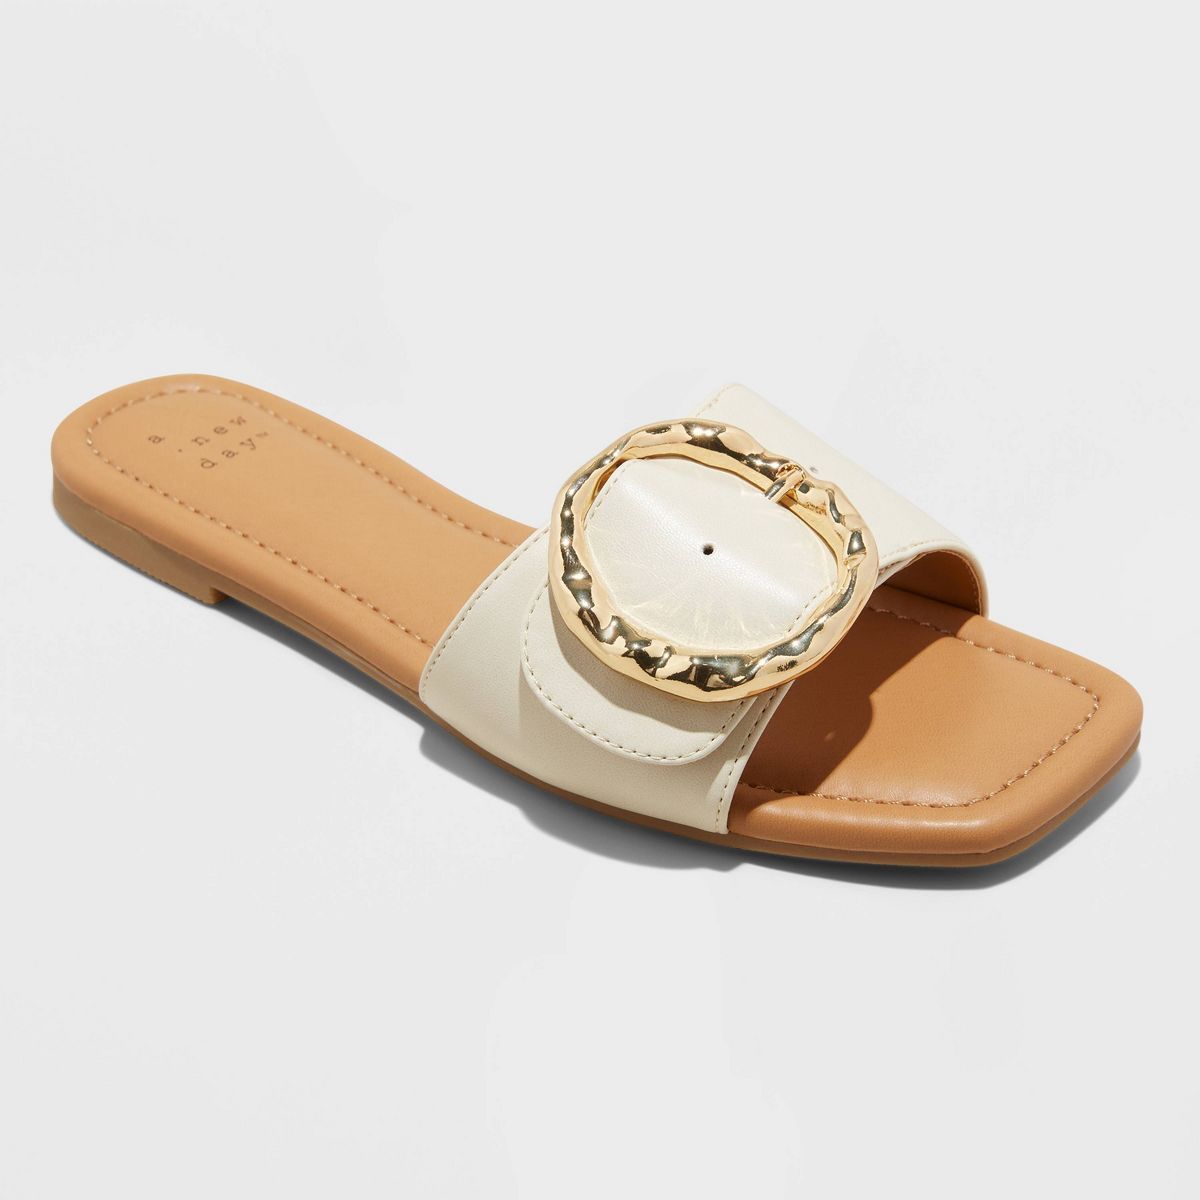 Women's Bennie Buckle Slide Sandals with Memory Foam Insole - A New Day™ Cream 6 | Target